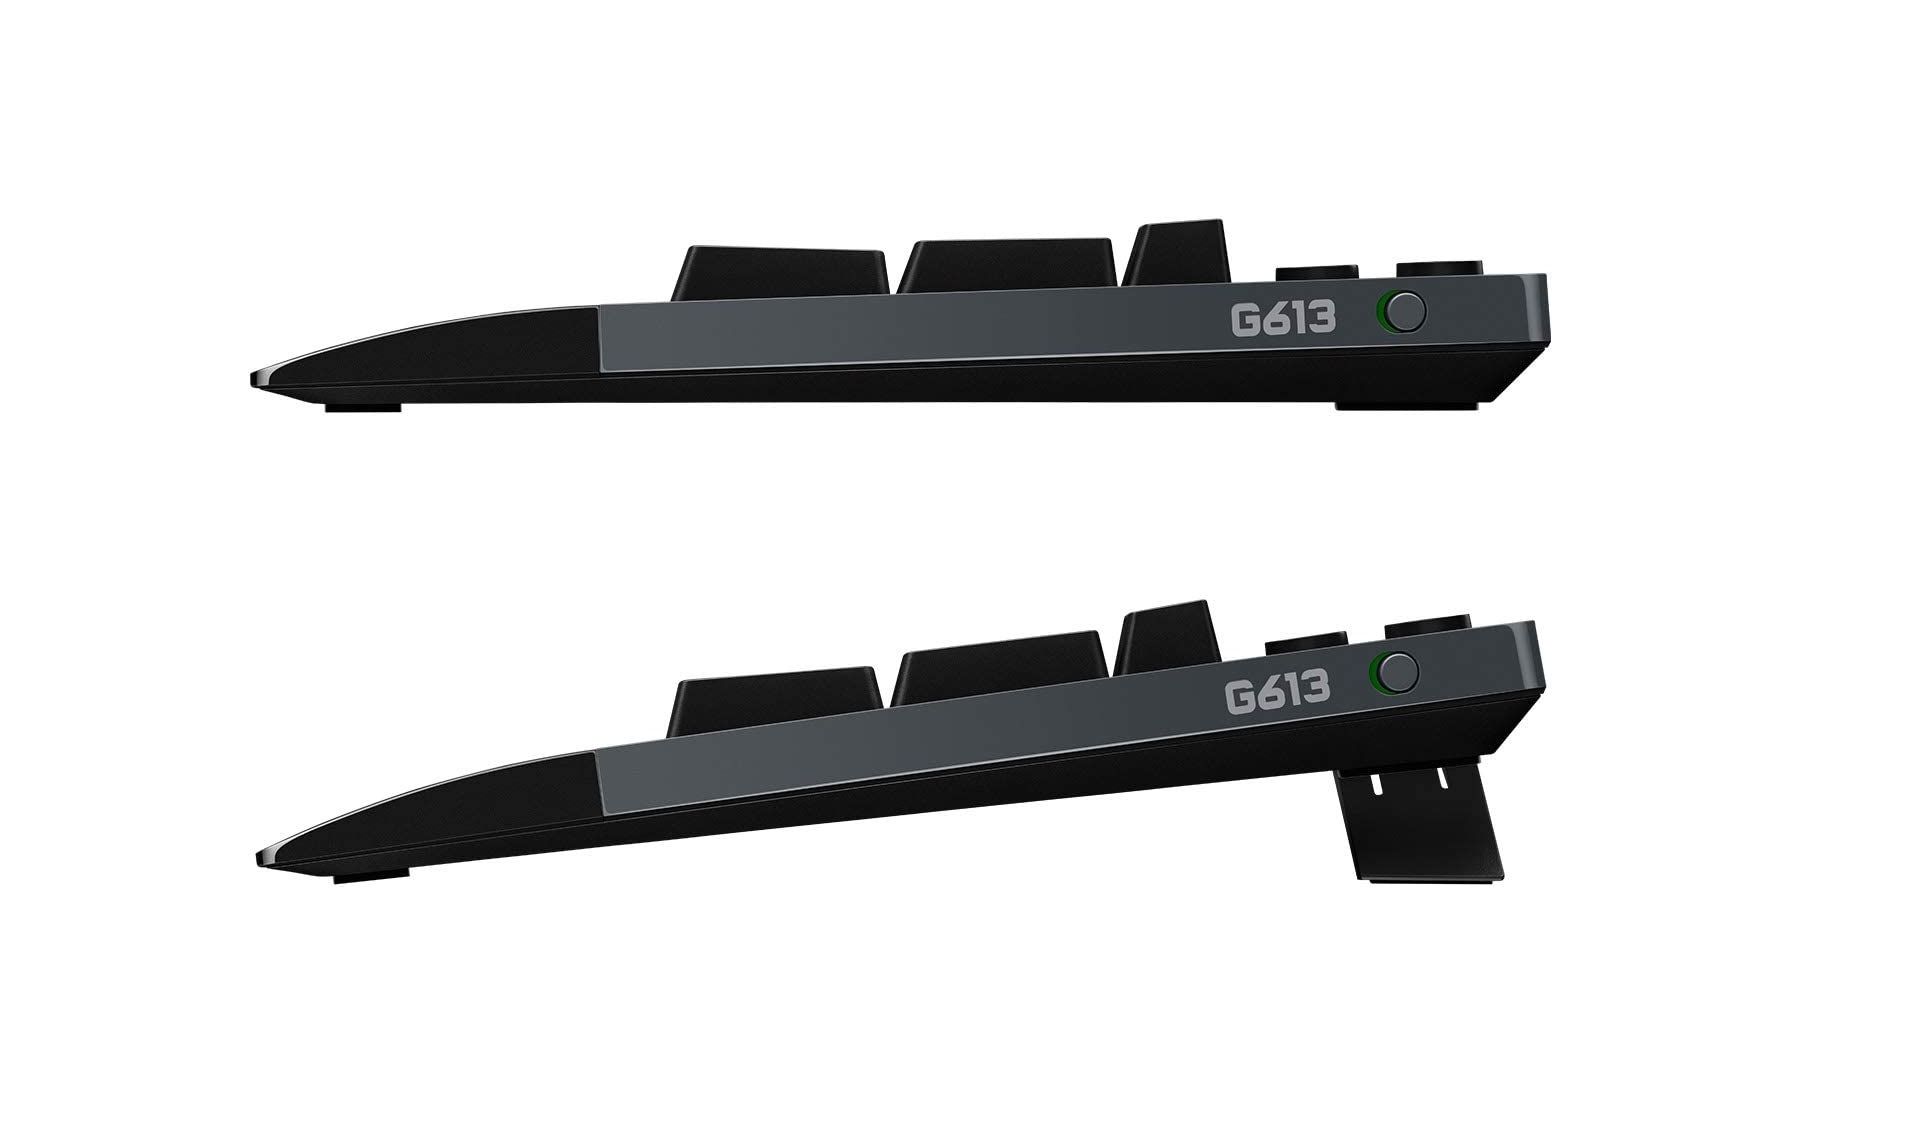 the adjustable height featured on the logitech g613 gaming keyboard